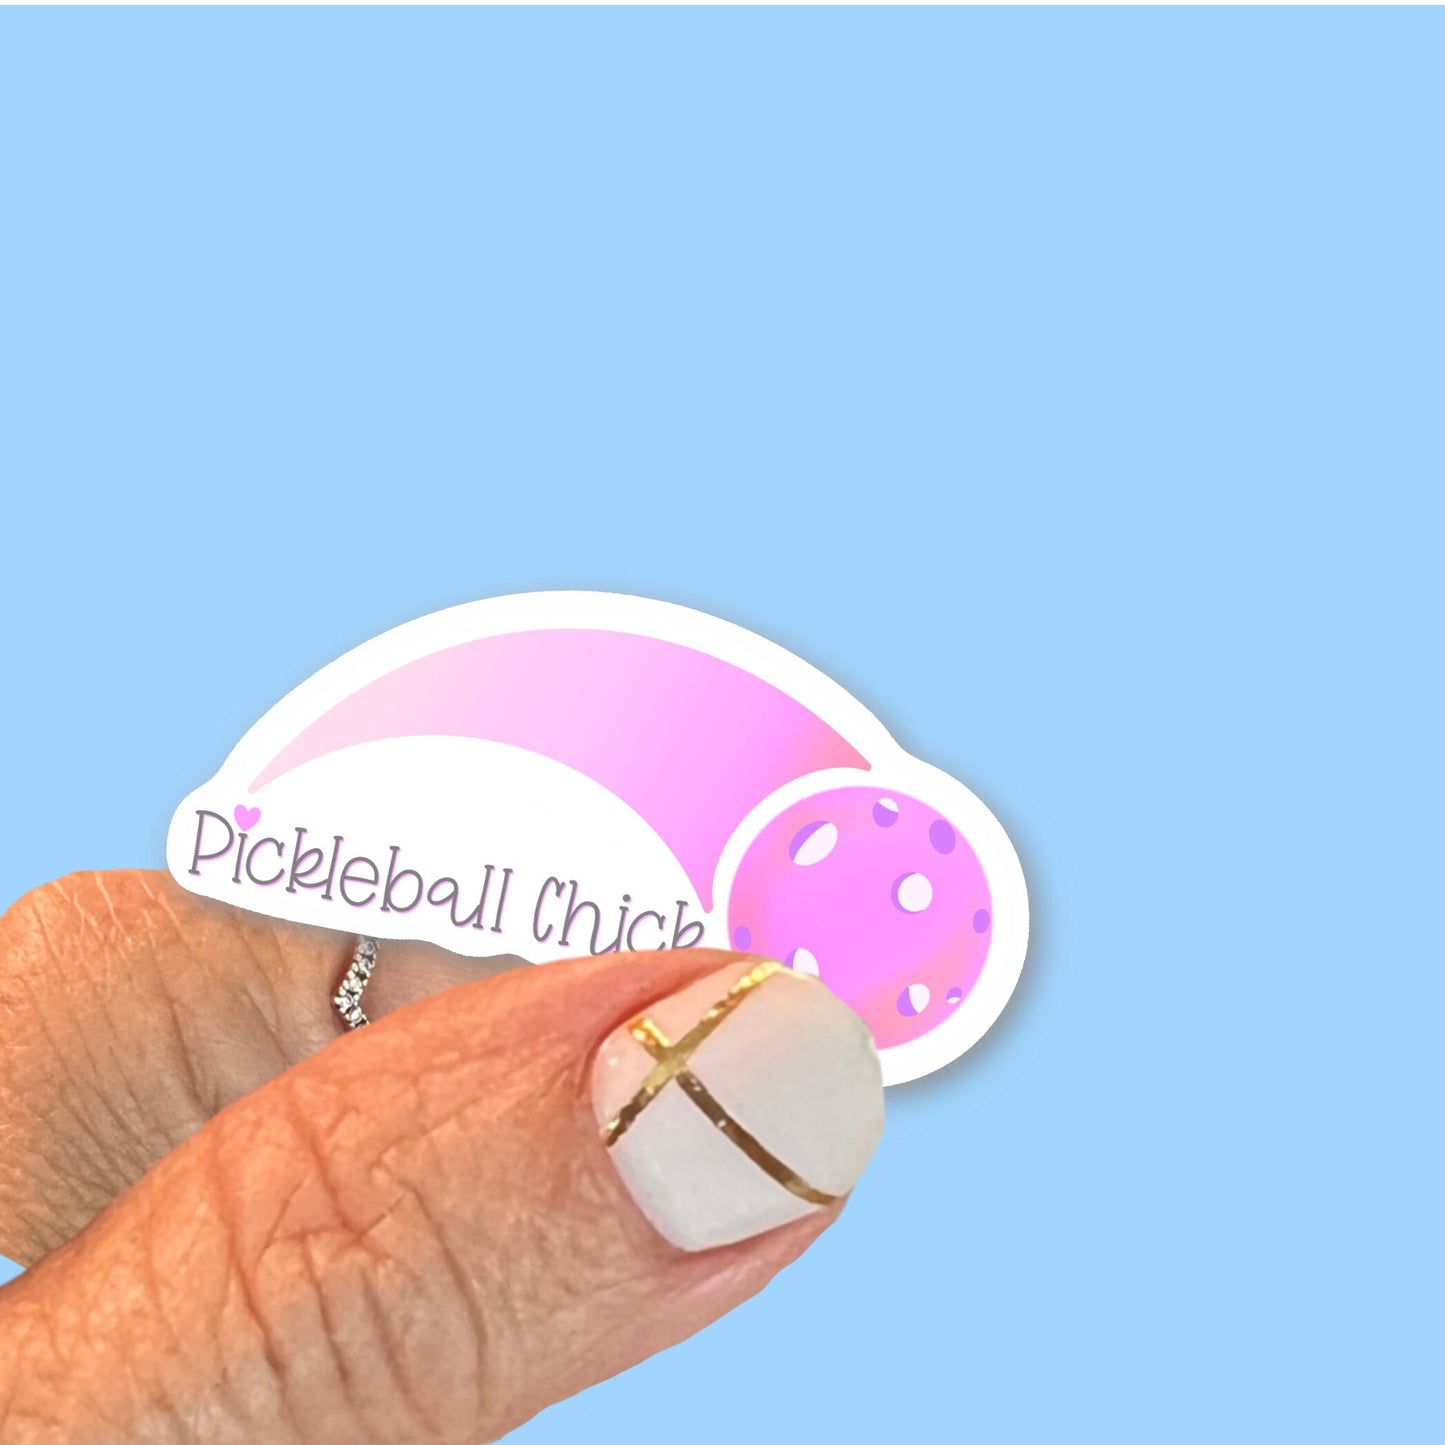 Pickleball Chick Sticker, Pink Pickleball, Waterproof, UV Resistant Vinyl Decal, Use for car, water bottle, laptop, choice of size